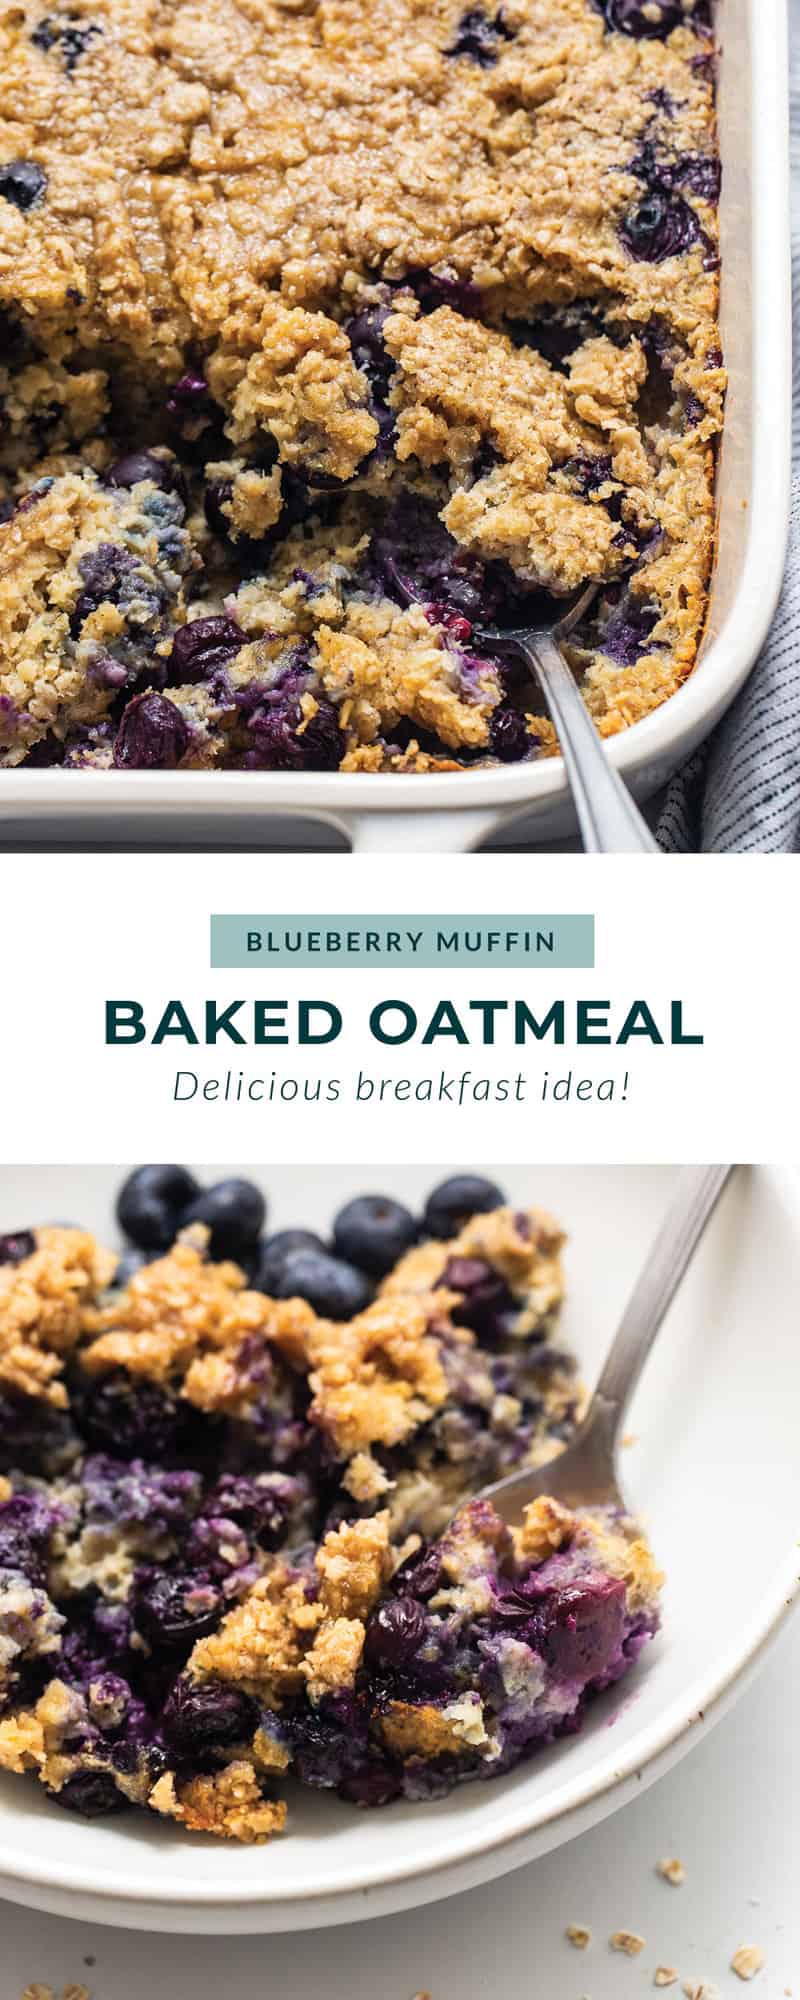 Blueberry muffin baked oatmeal.